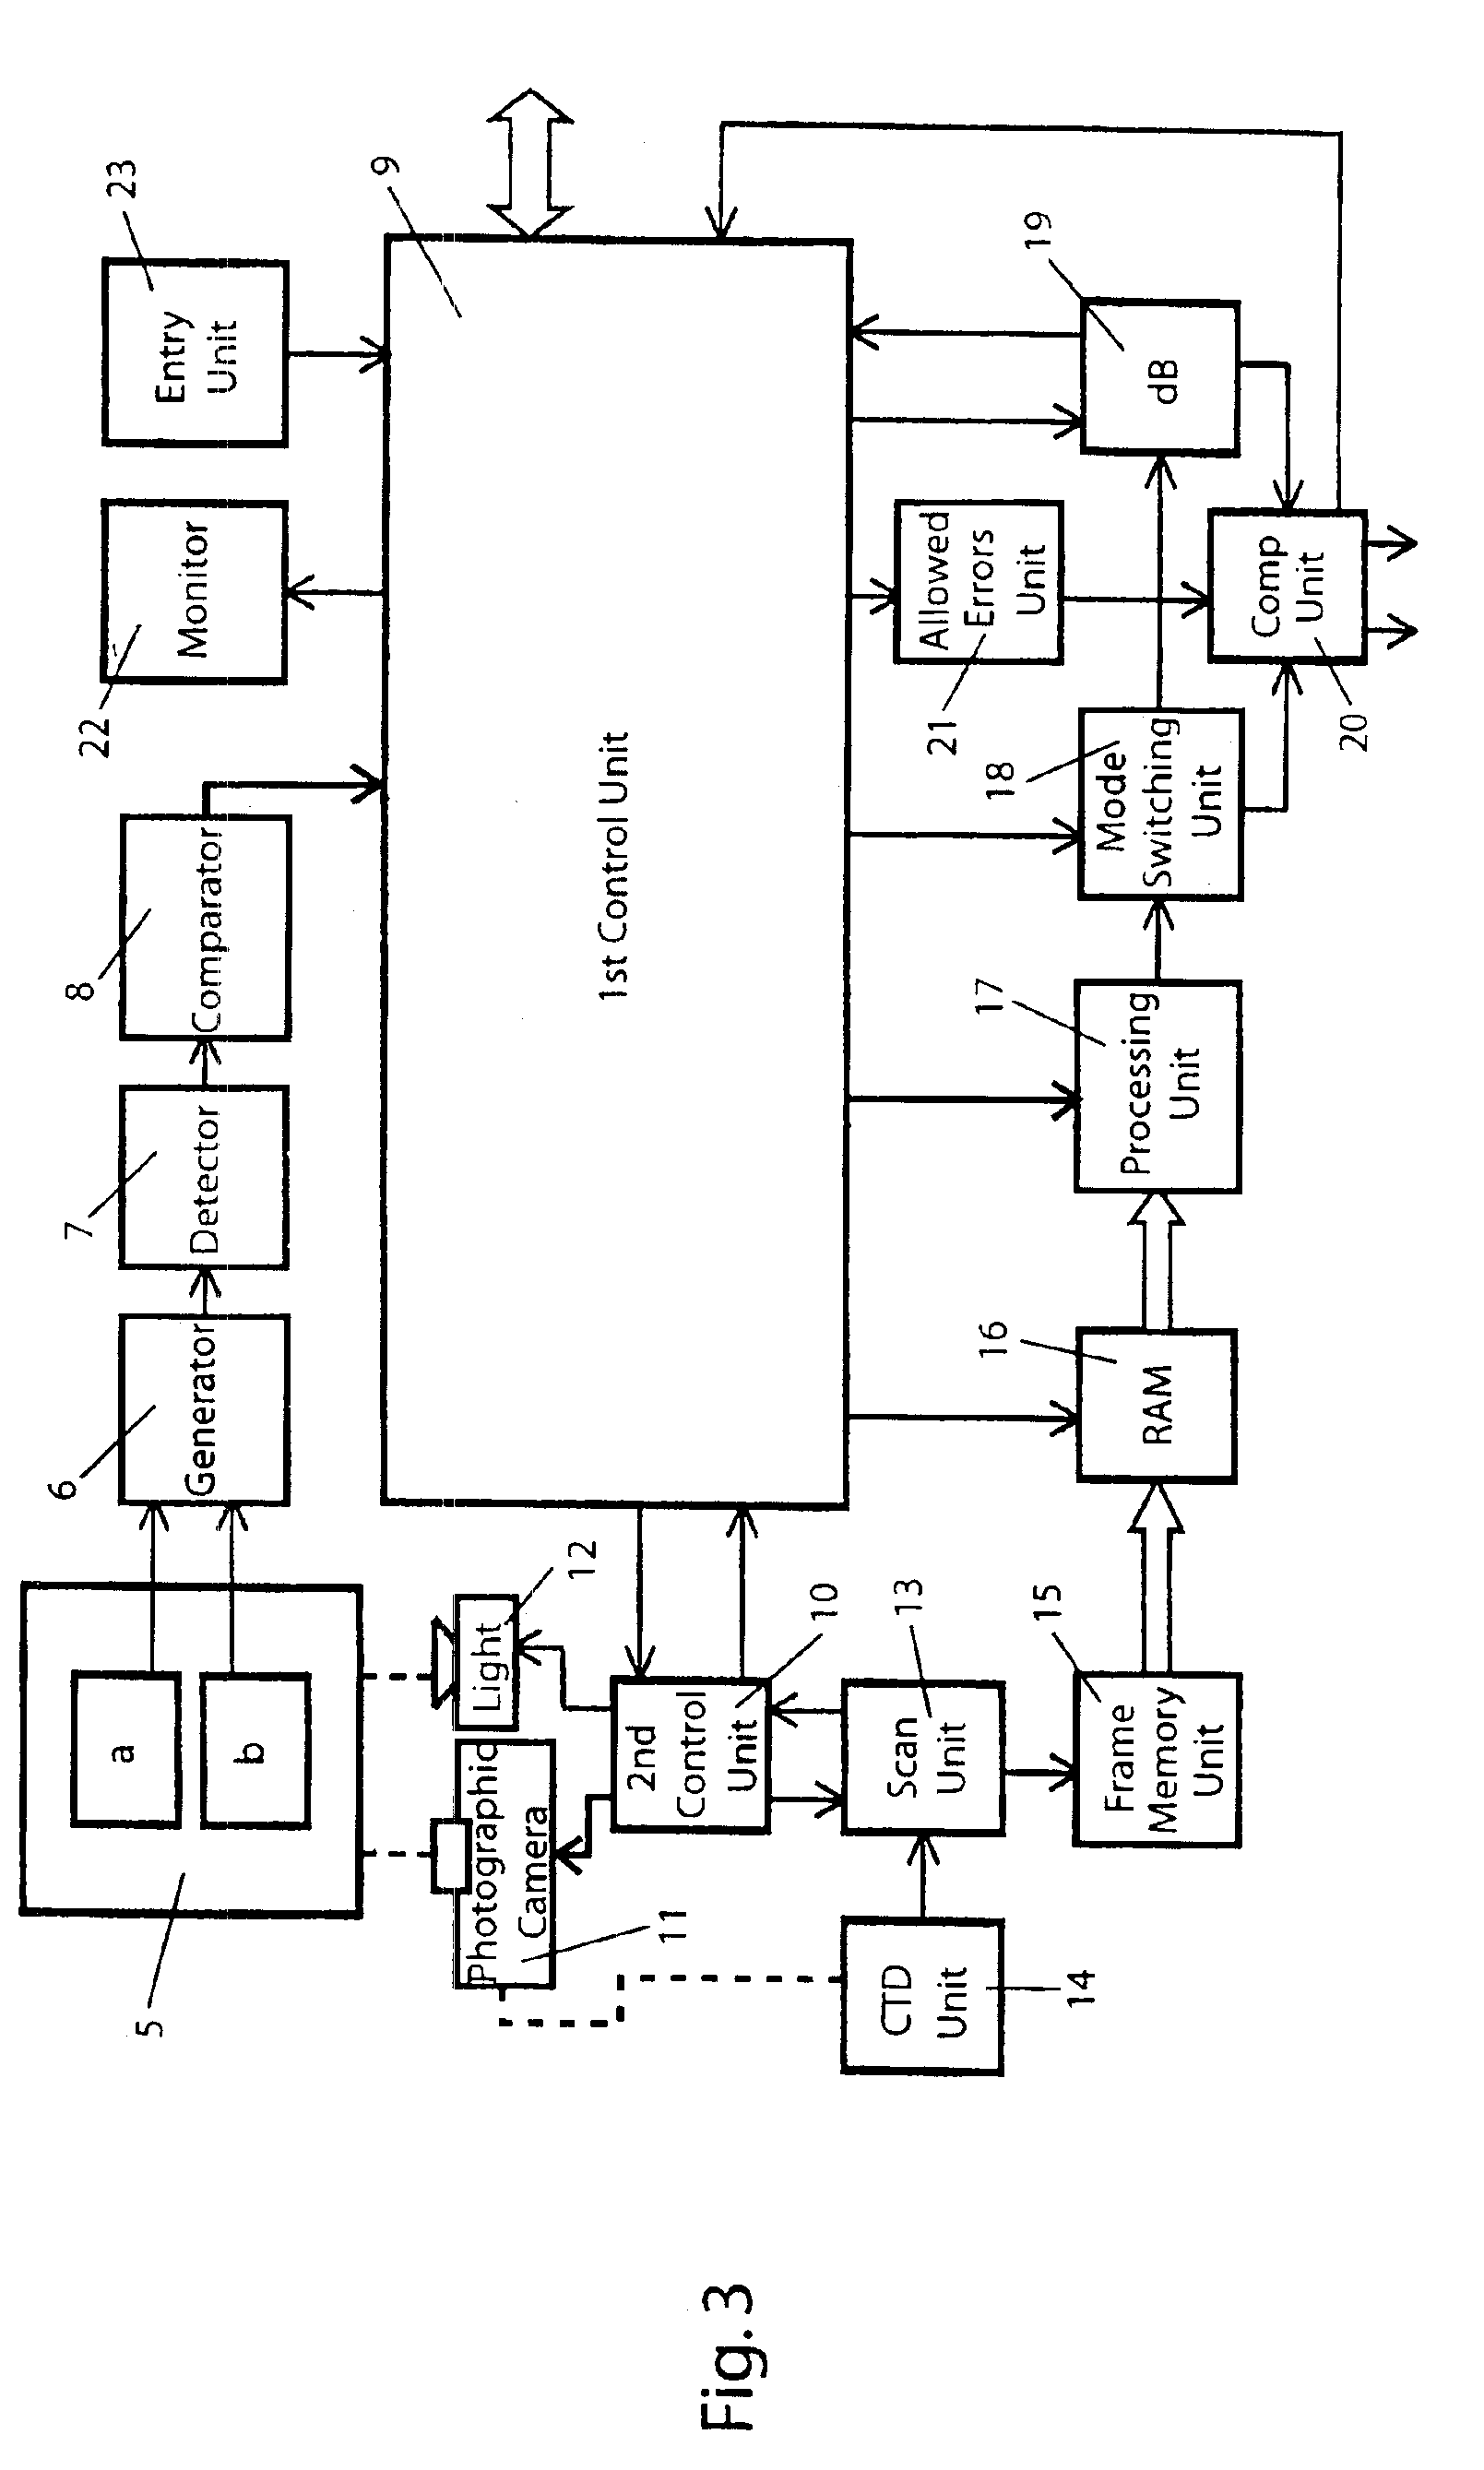 Personal identification method, electronic identification system and apparatus for personal biometrical identification by gauging geometry of the person's hand